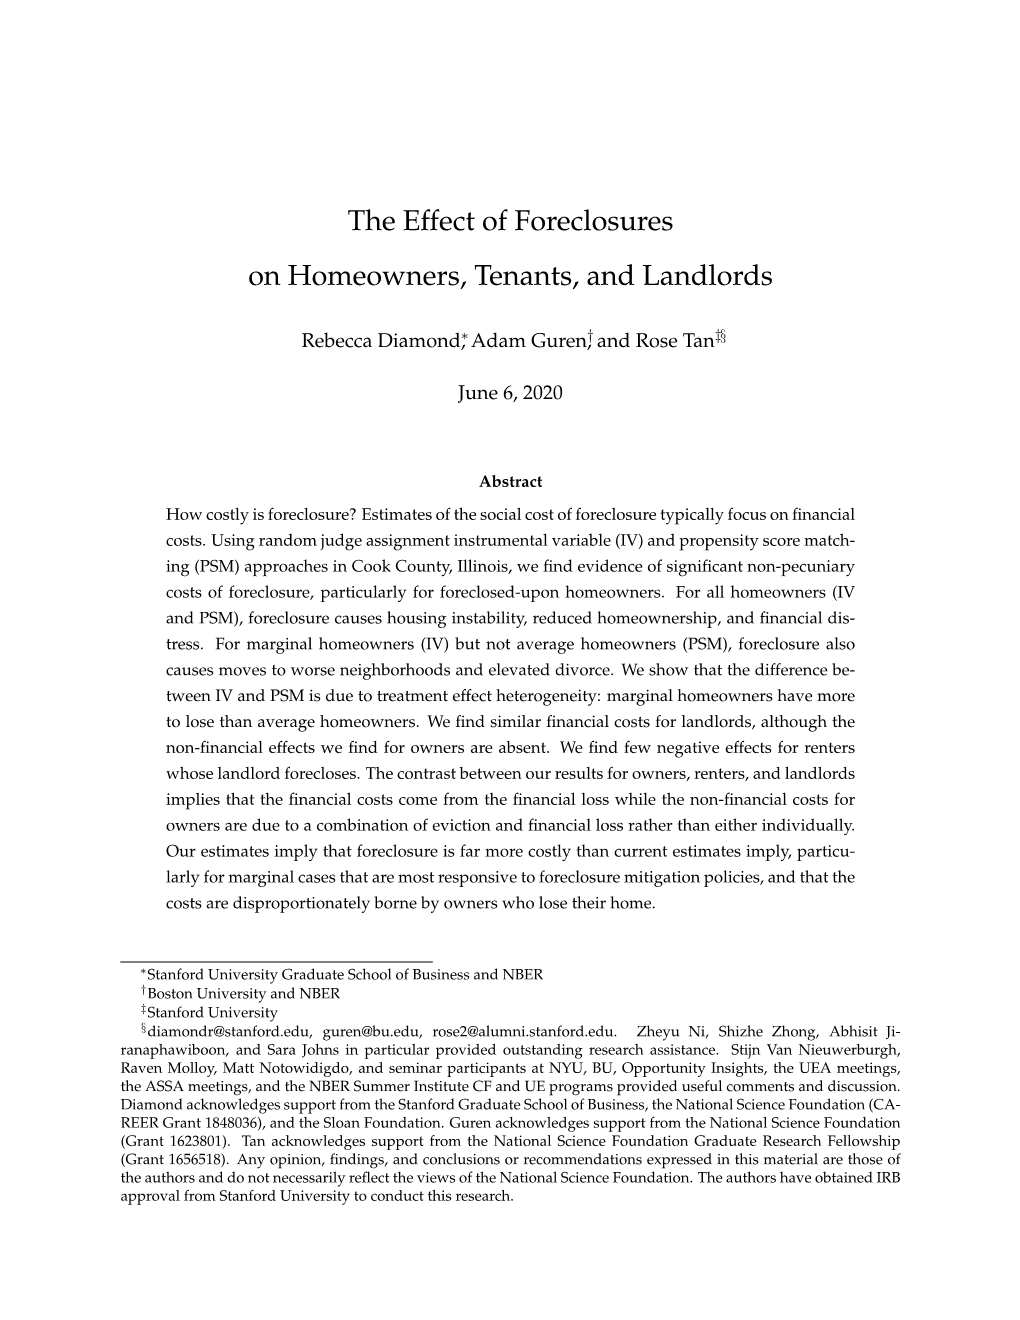 The Effect of Foreclosures on Homeowners, Tenants, and Landlords